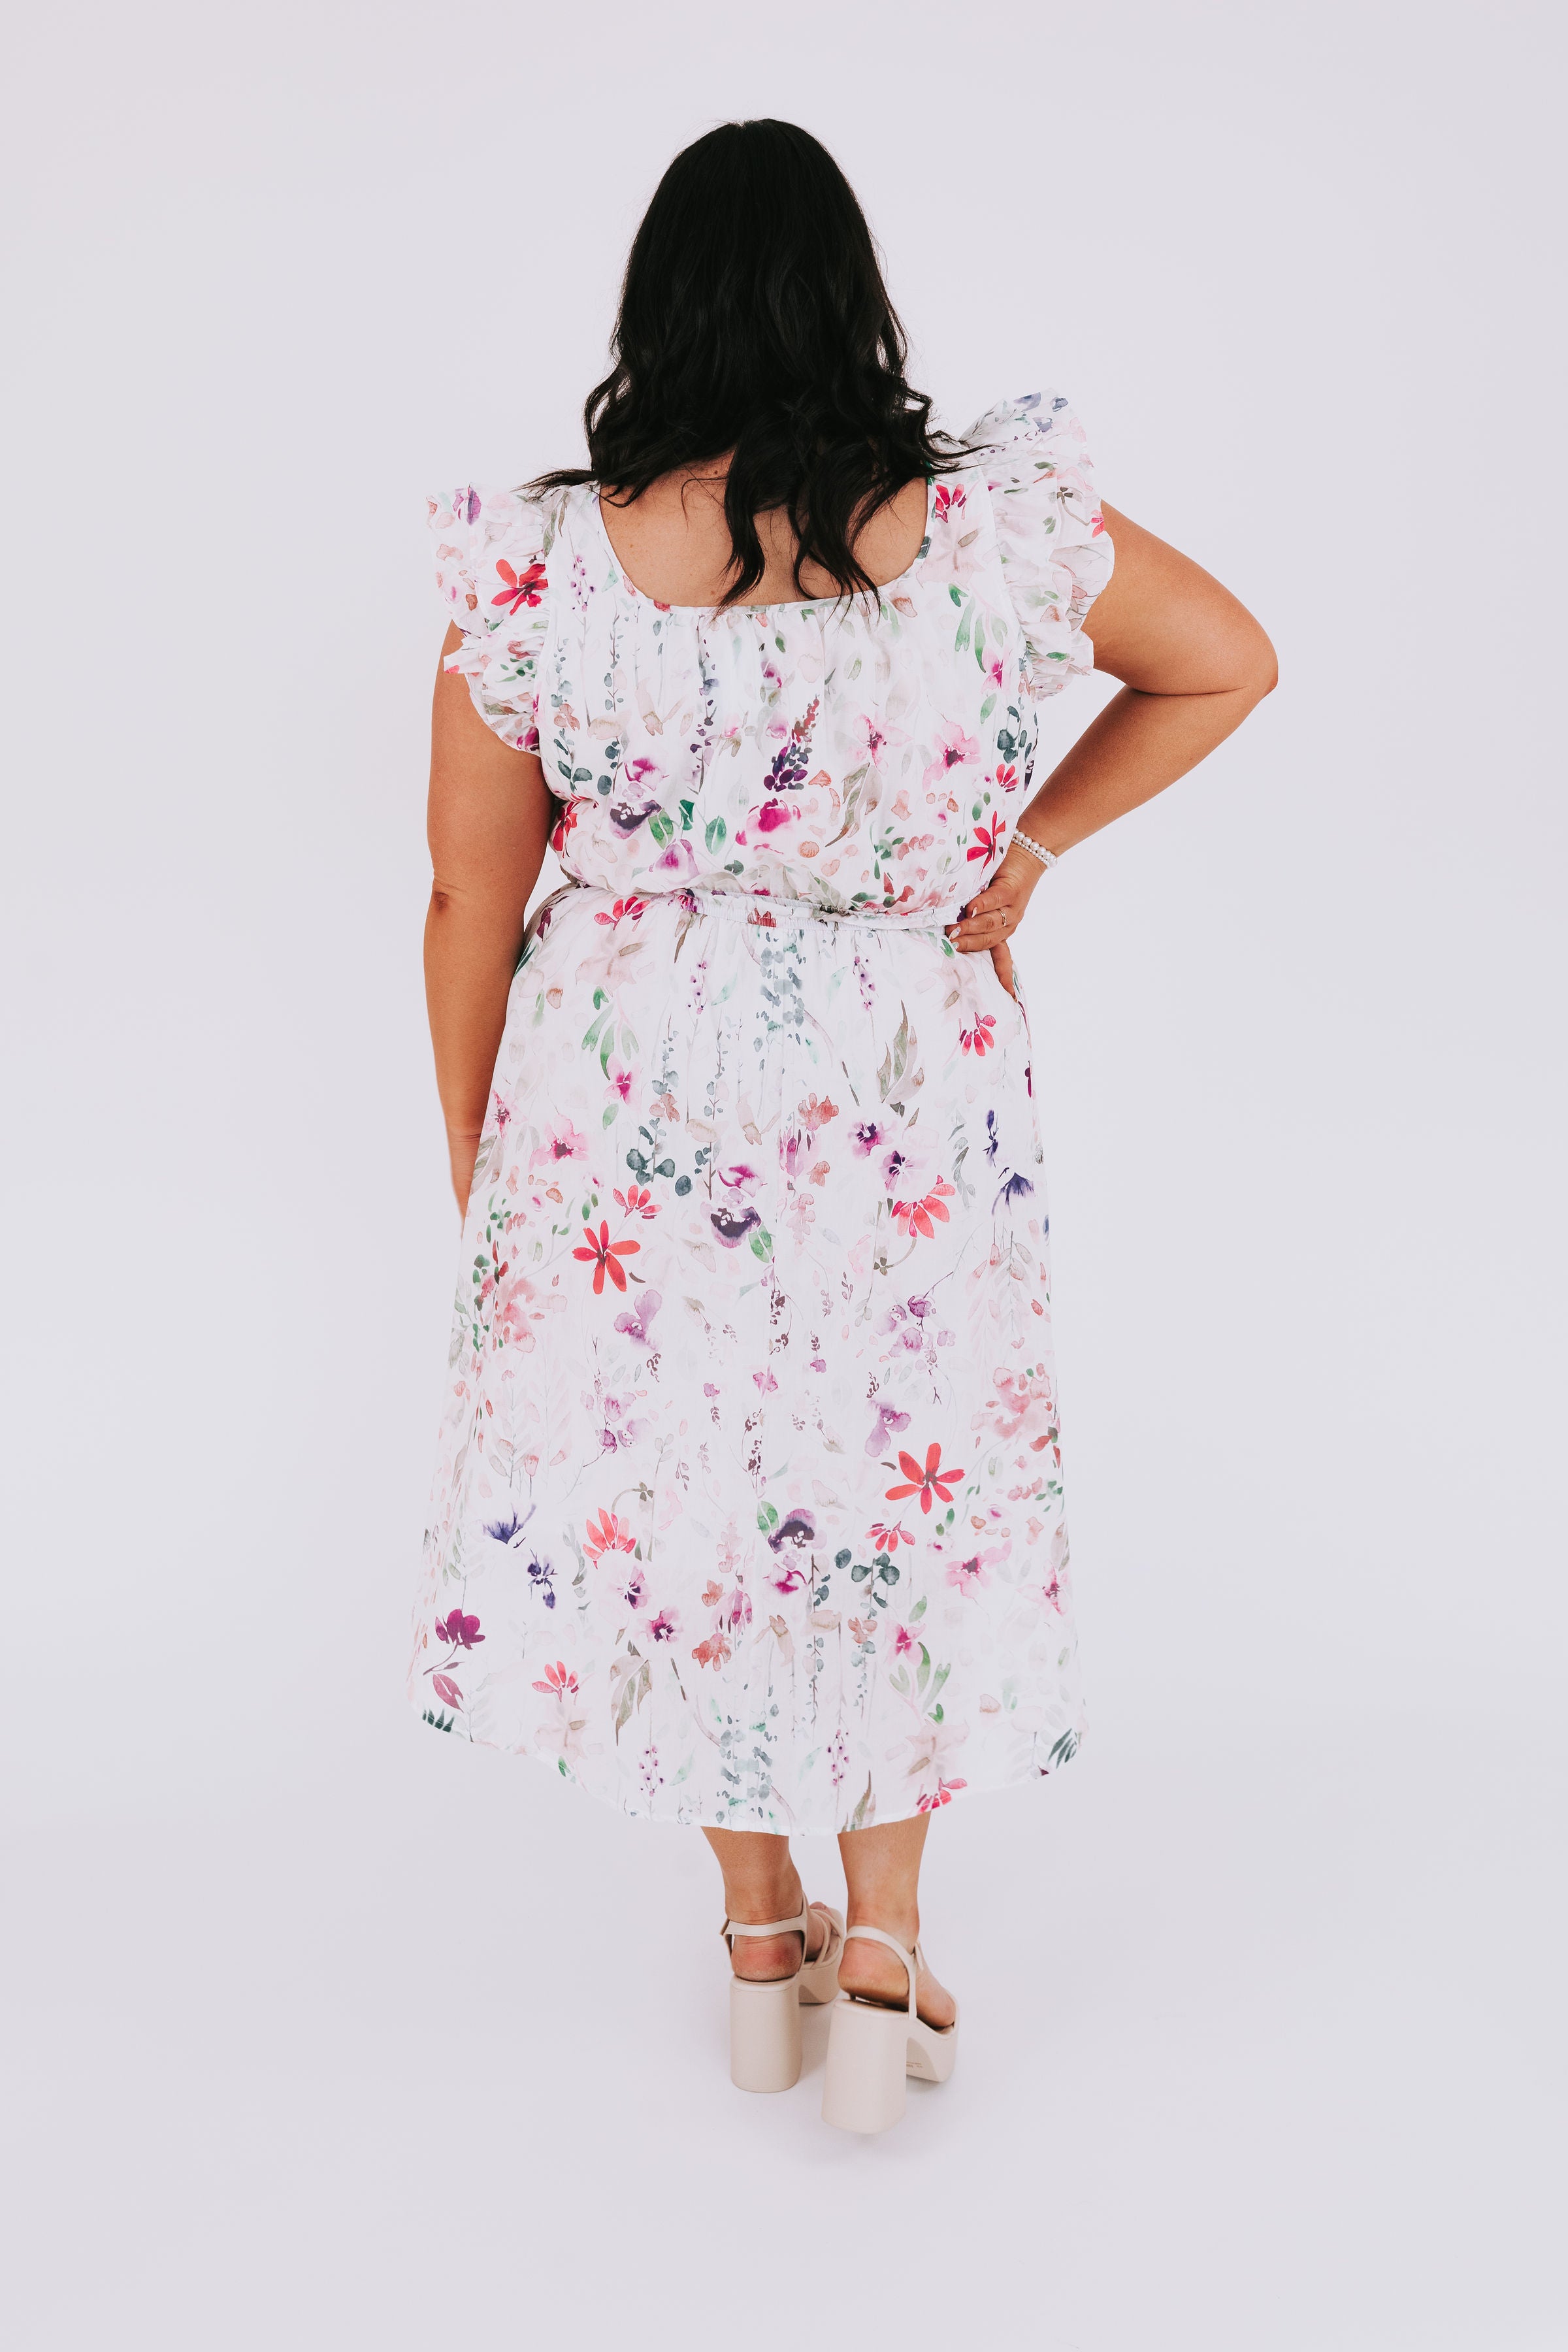 PLUS SIZE - Can't Hurry Love Dress